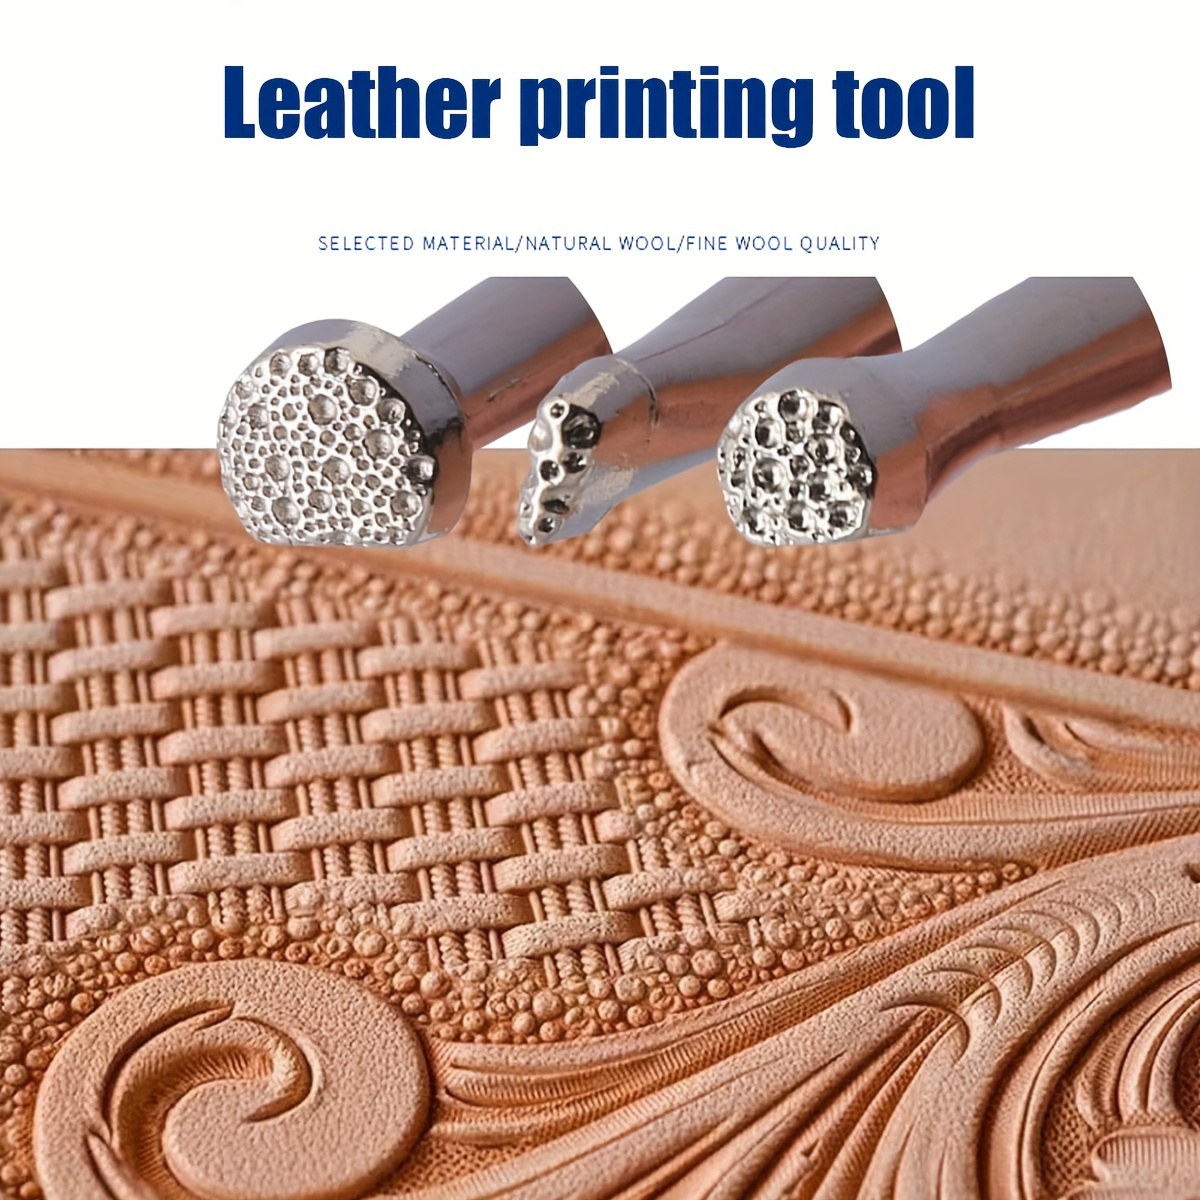 33 PCS Leather Stamping Tool Set 32 PCS Leather Stamps Patterns + 1  Stamping Handle for Leather Craft Quality Leather Craft Tool Stamp Set for  DIY Beginners and Professionals